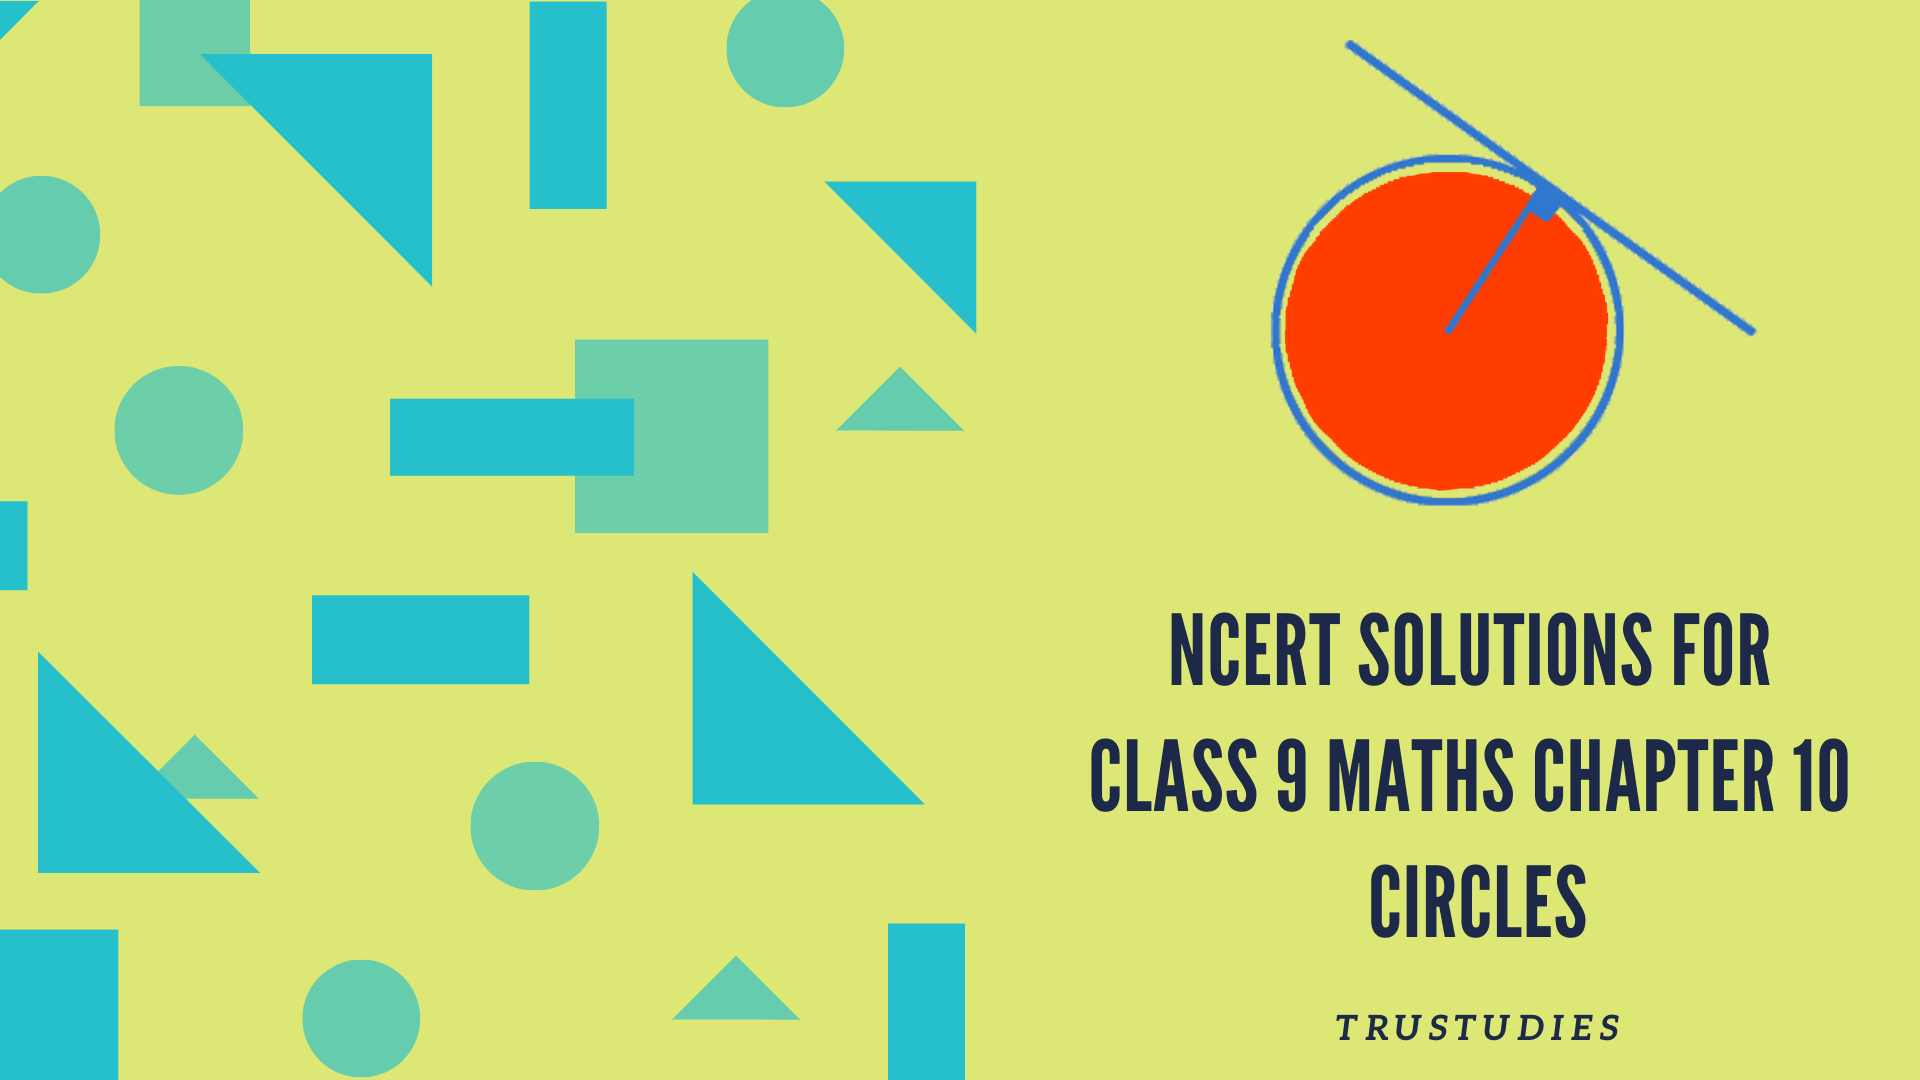 NCERT solutions for class 9 maths chapter 10 circles banner image